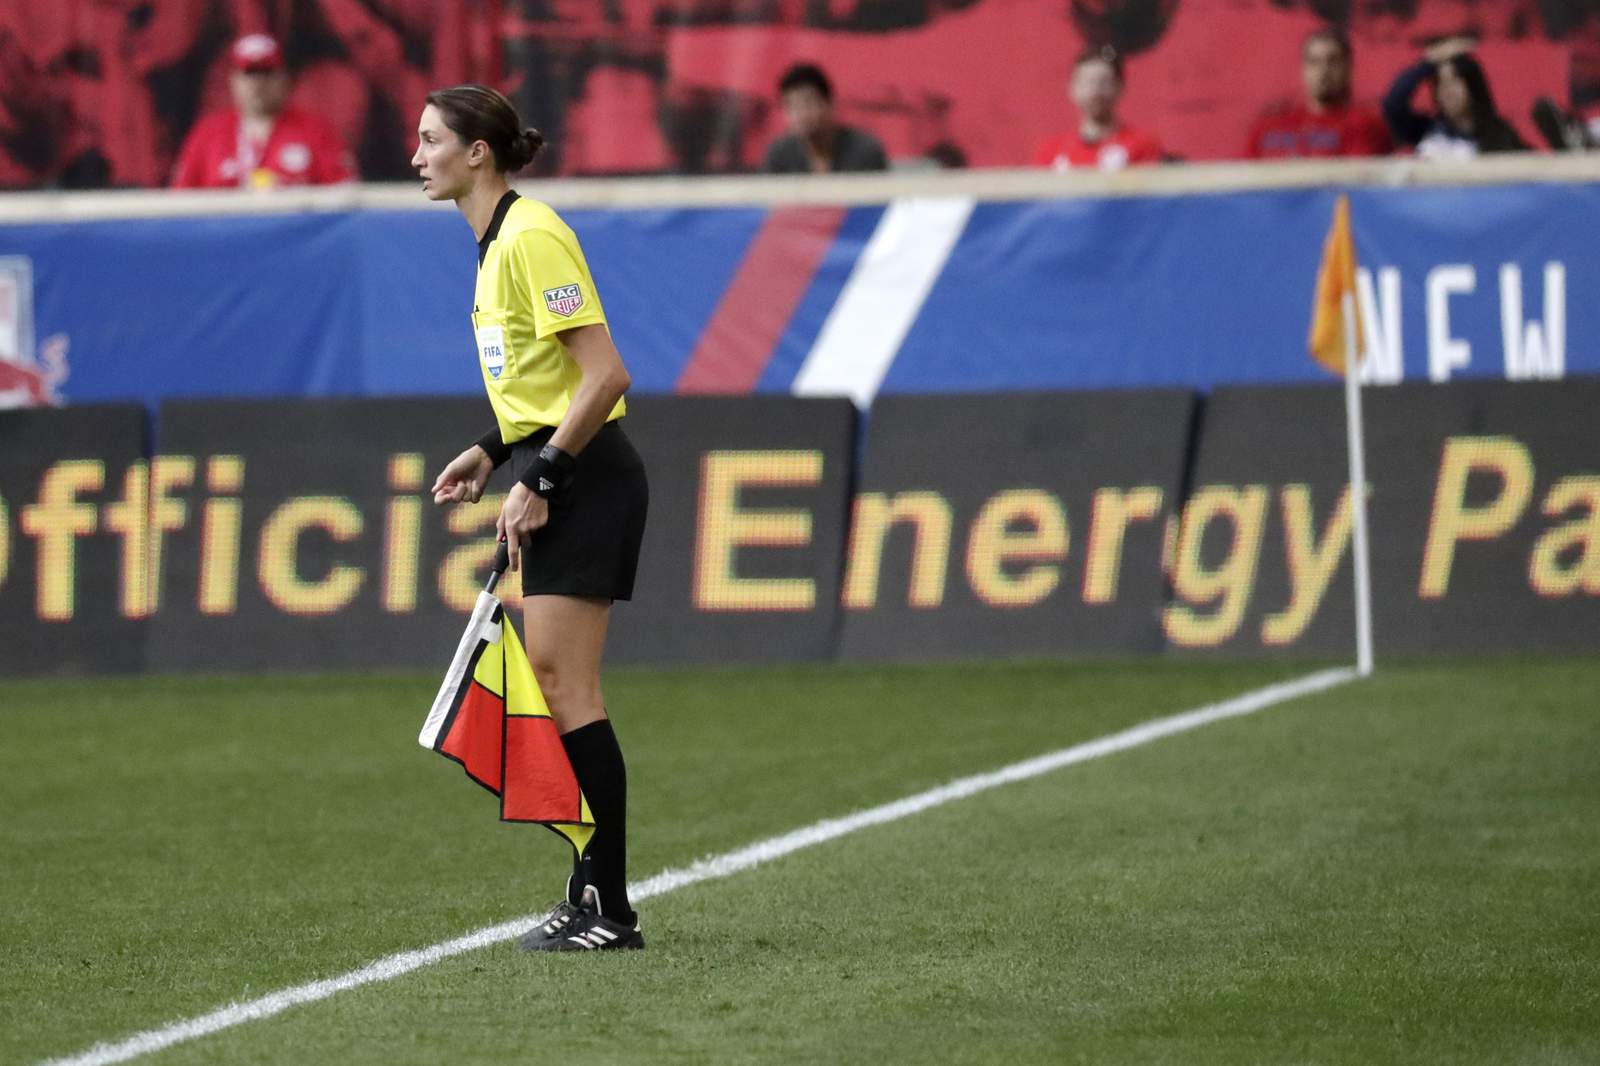 MLS makes history with first female referee to work a final game